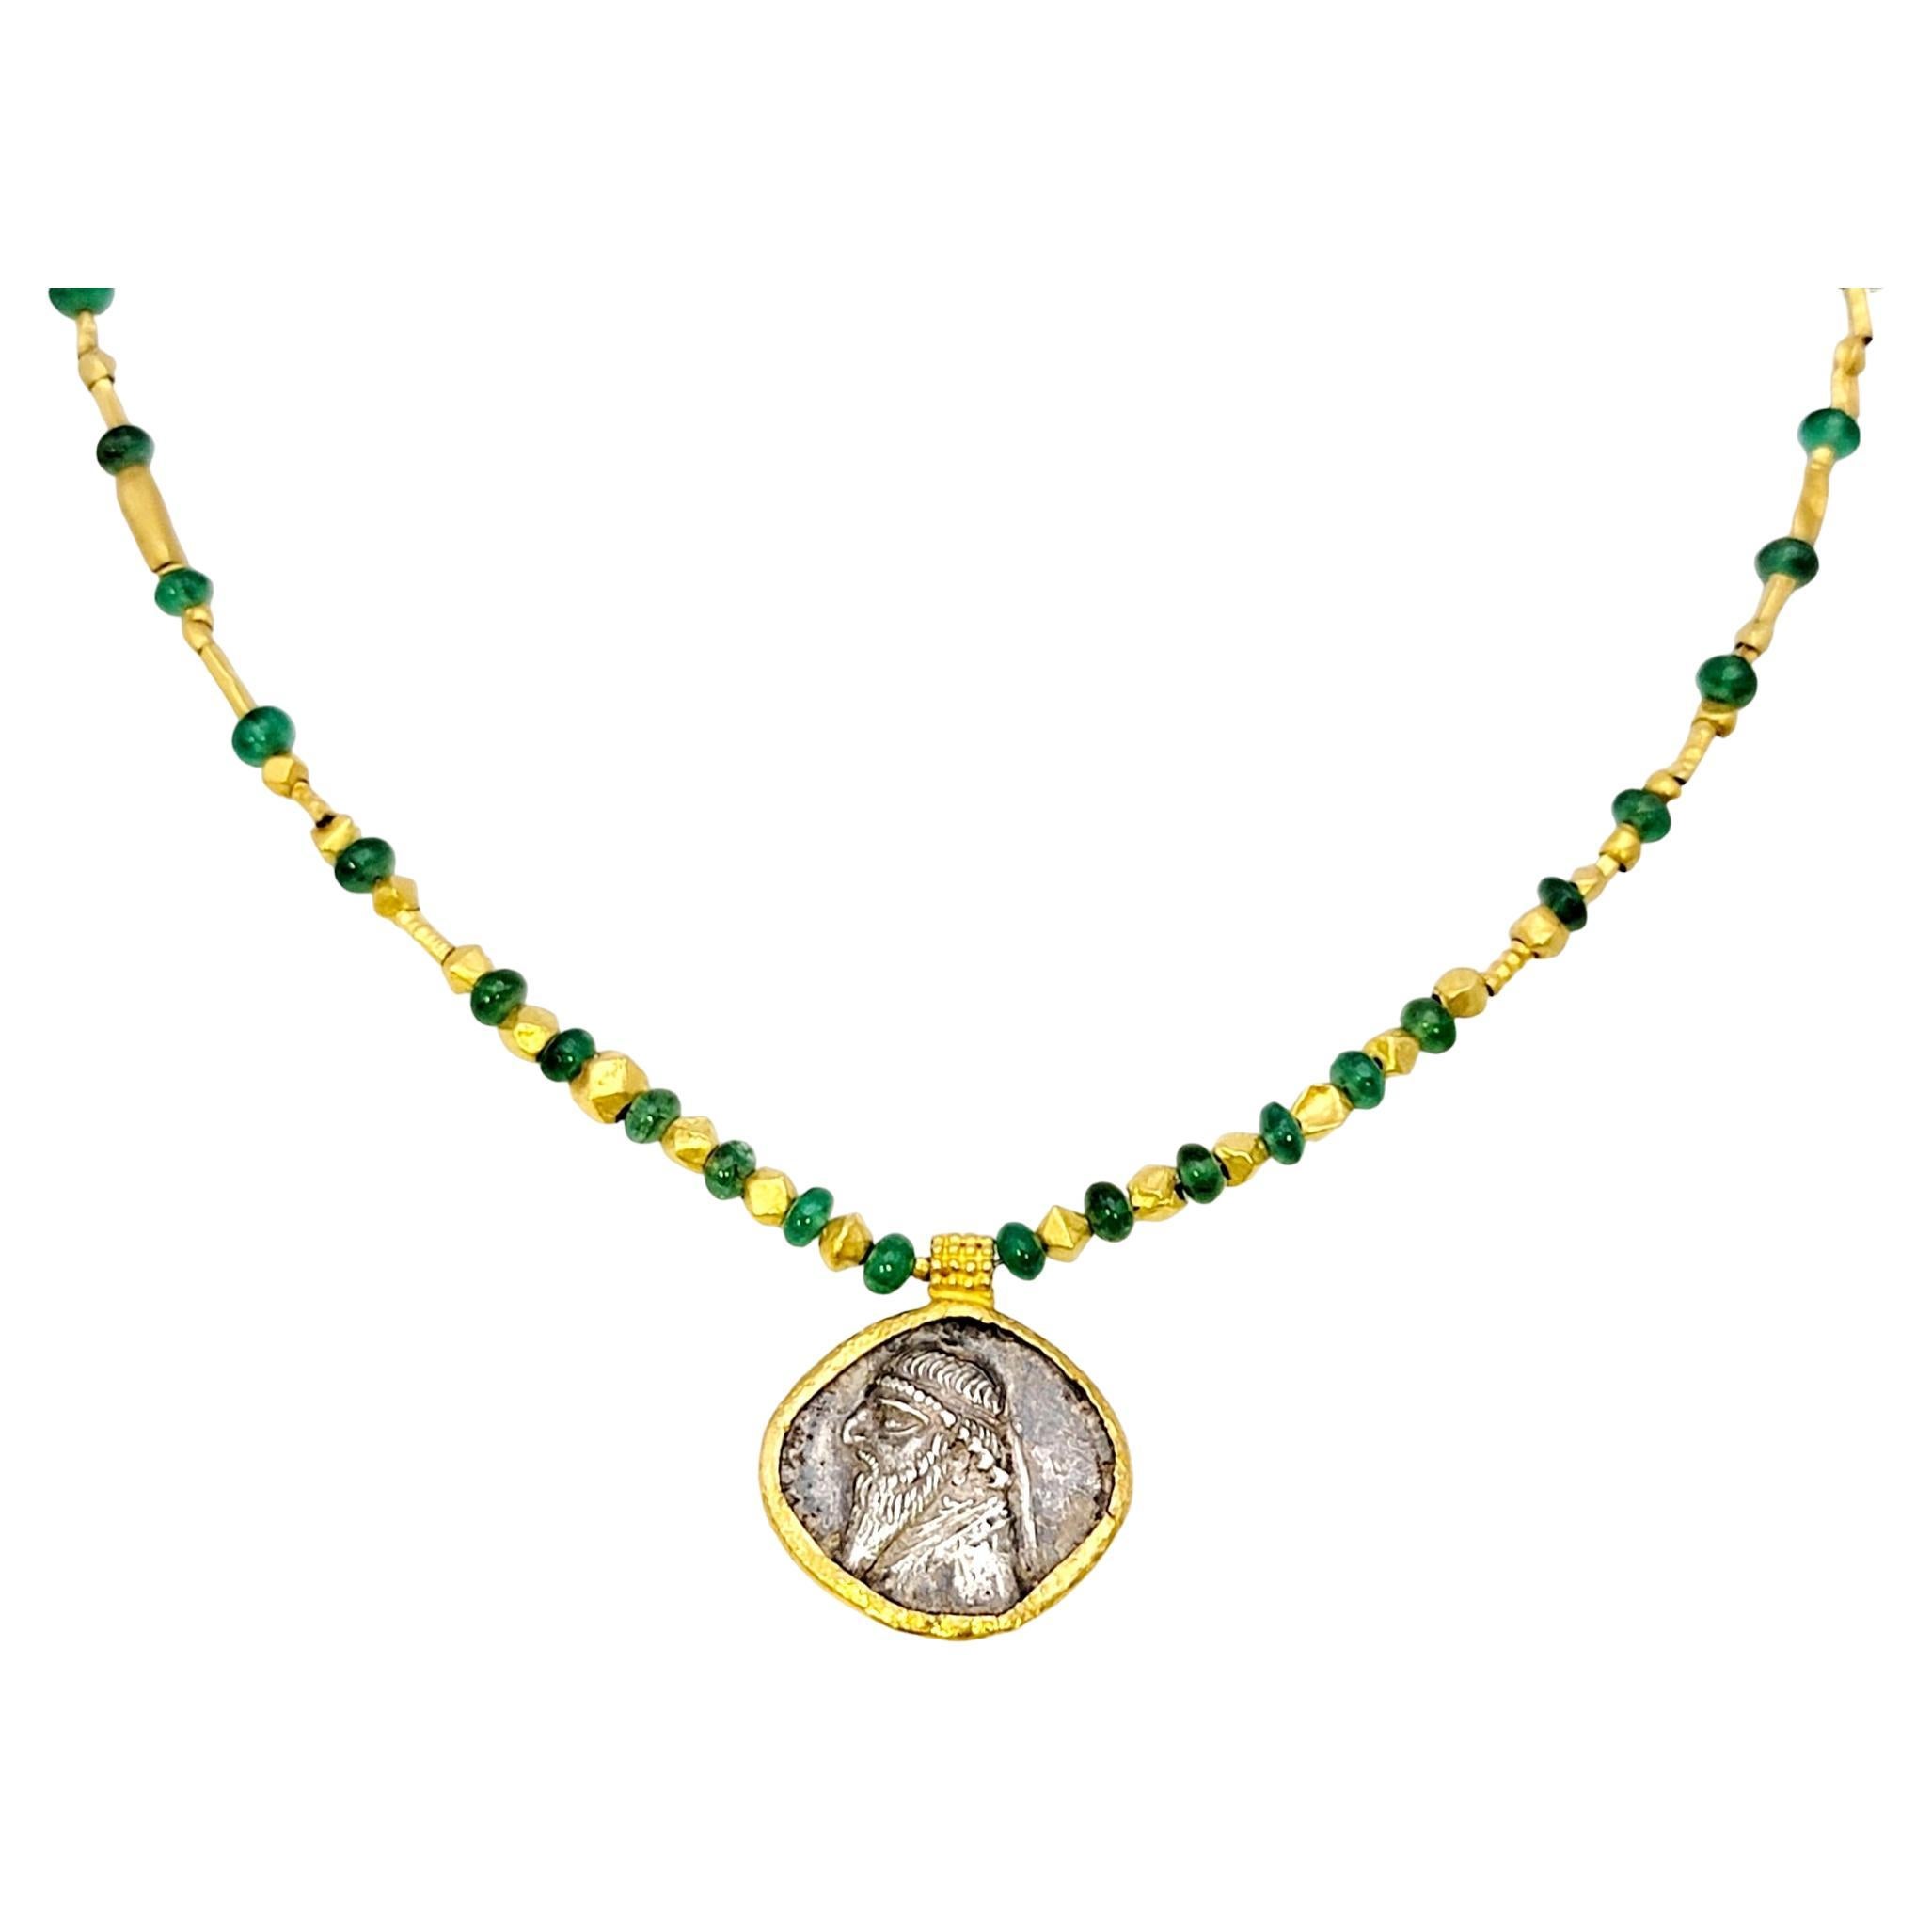 Bead Tetradrachm of Mithridates II Silver Coin Pendant and Emerald Necklace 22 Karat For Sale